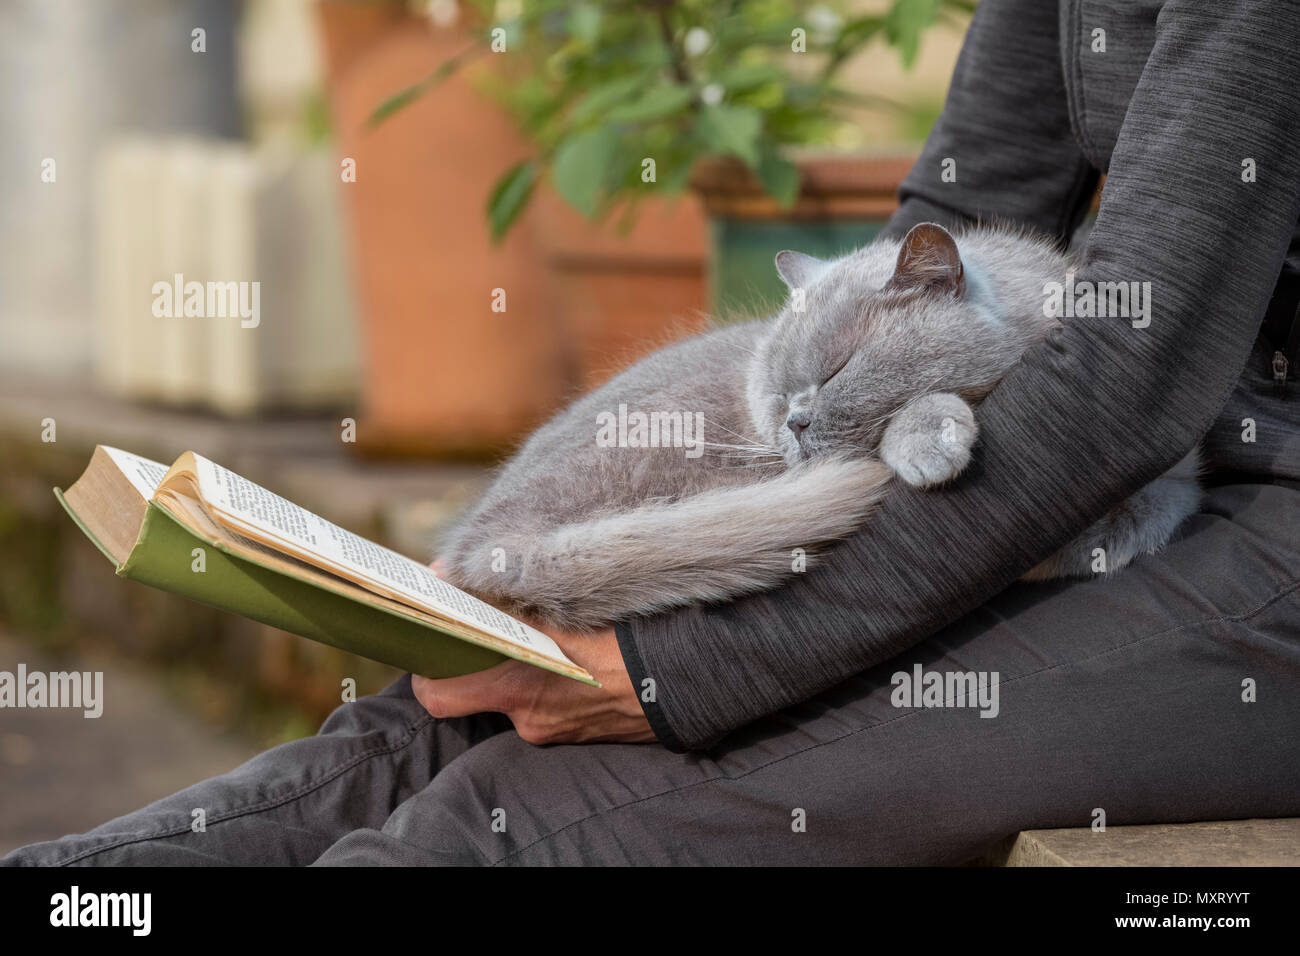 A woman reading a book with a grey cat asleep on her lap. Stock Photo